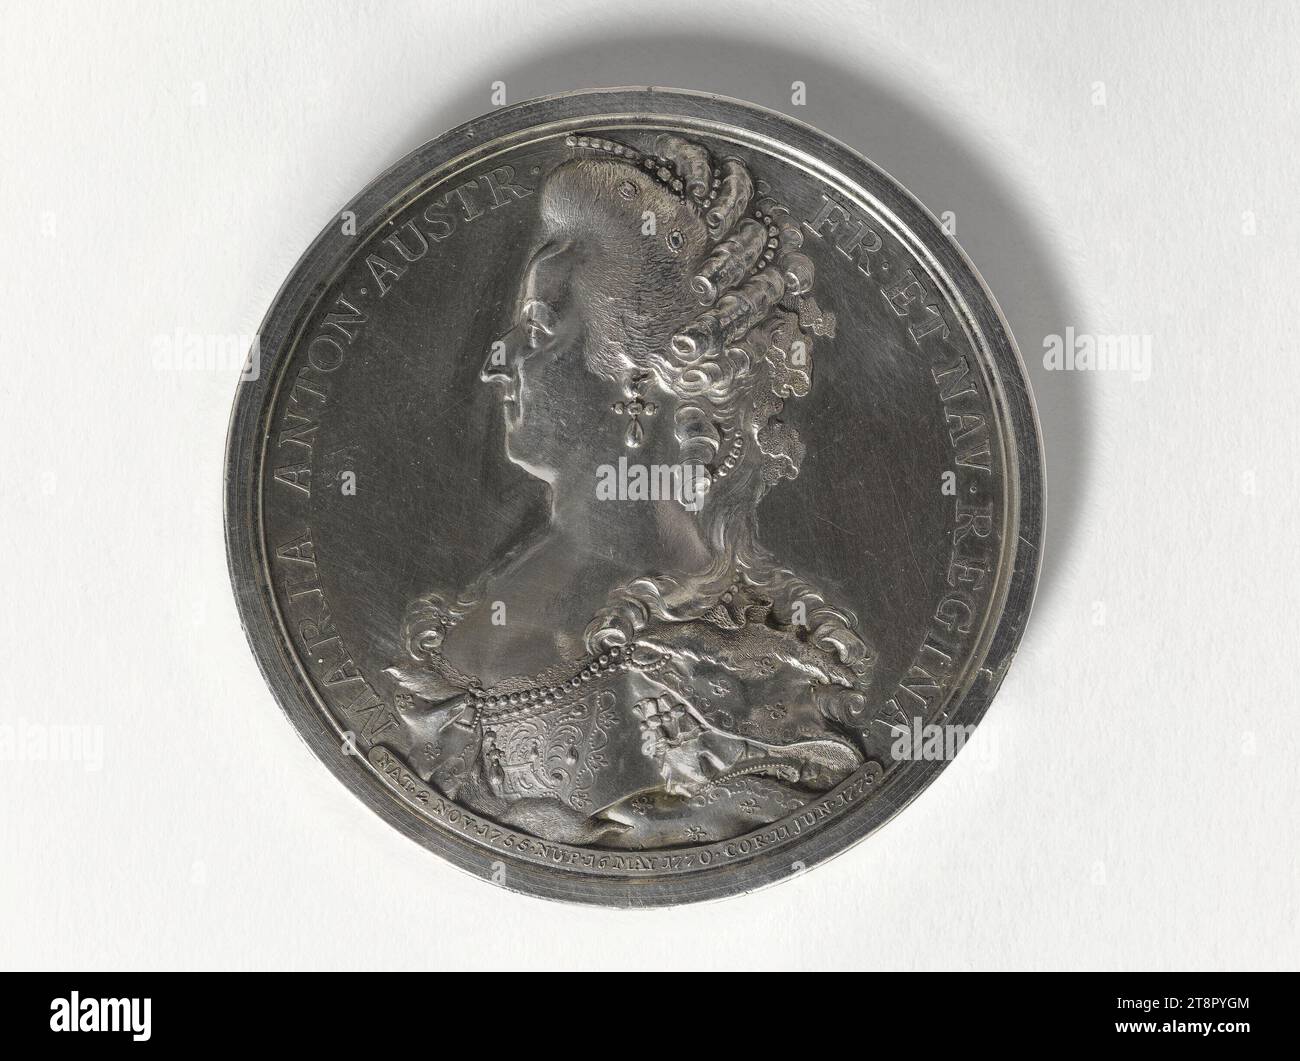 Execution of Marie-Antoinette, October 16, 1793, Küchler, Conrad Heinrich, Medal Engraver, Array, Numismatic, Medal, Dimensions - Work: Diameter: 4.8 cm, Weight (type dimension): 58.48 g Stock Photo